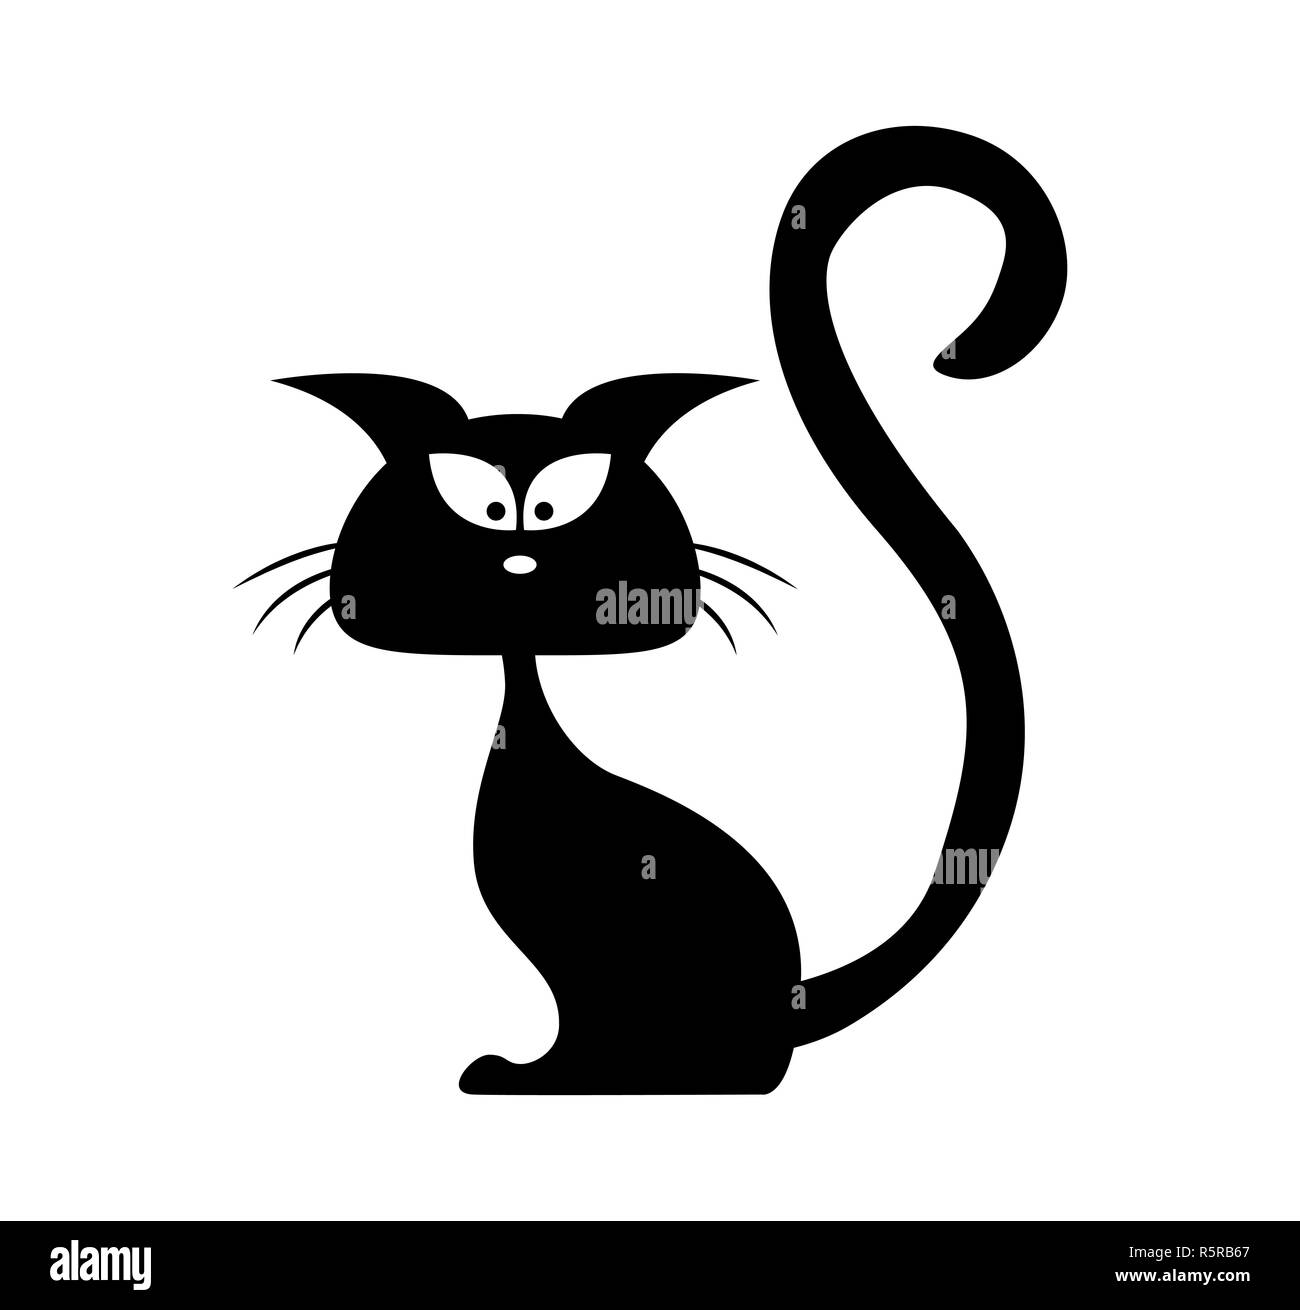 Angry black cat face clipart isolated on white. Cartoon style